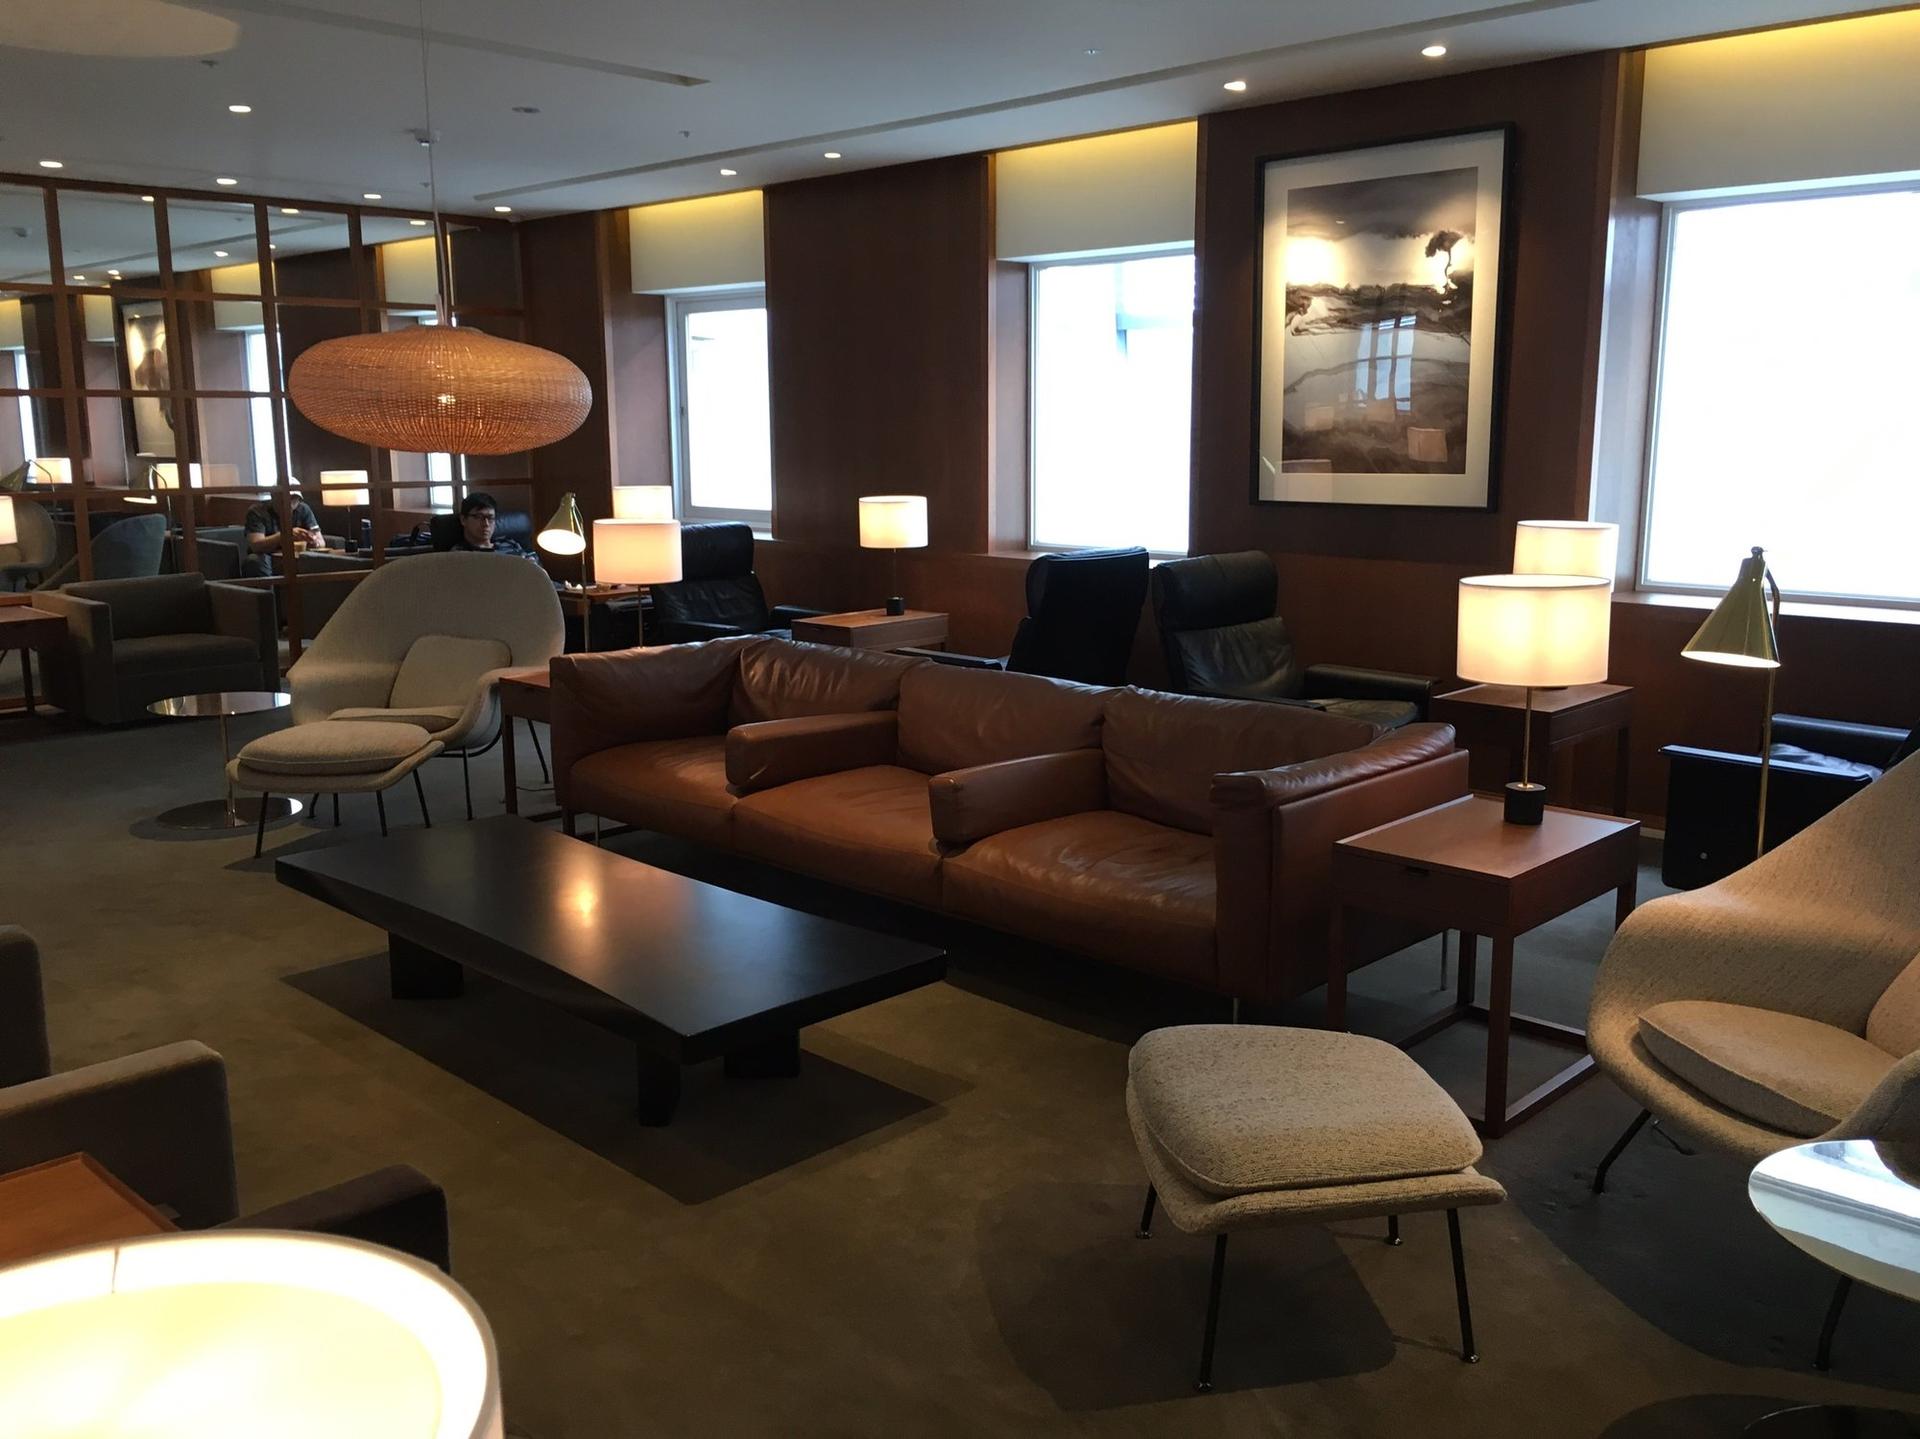 Cathay Pacific Lounge image 37 of 37